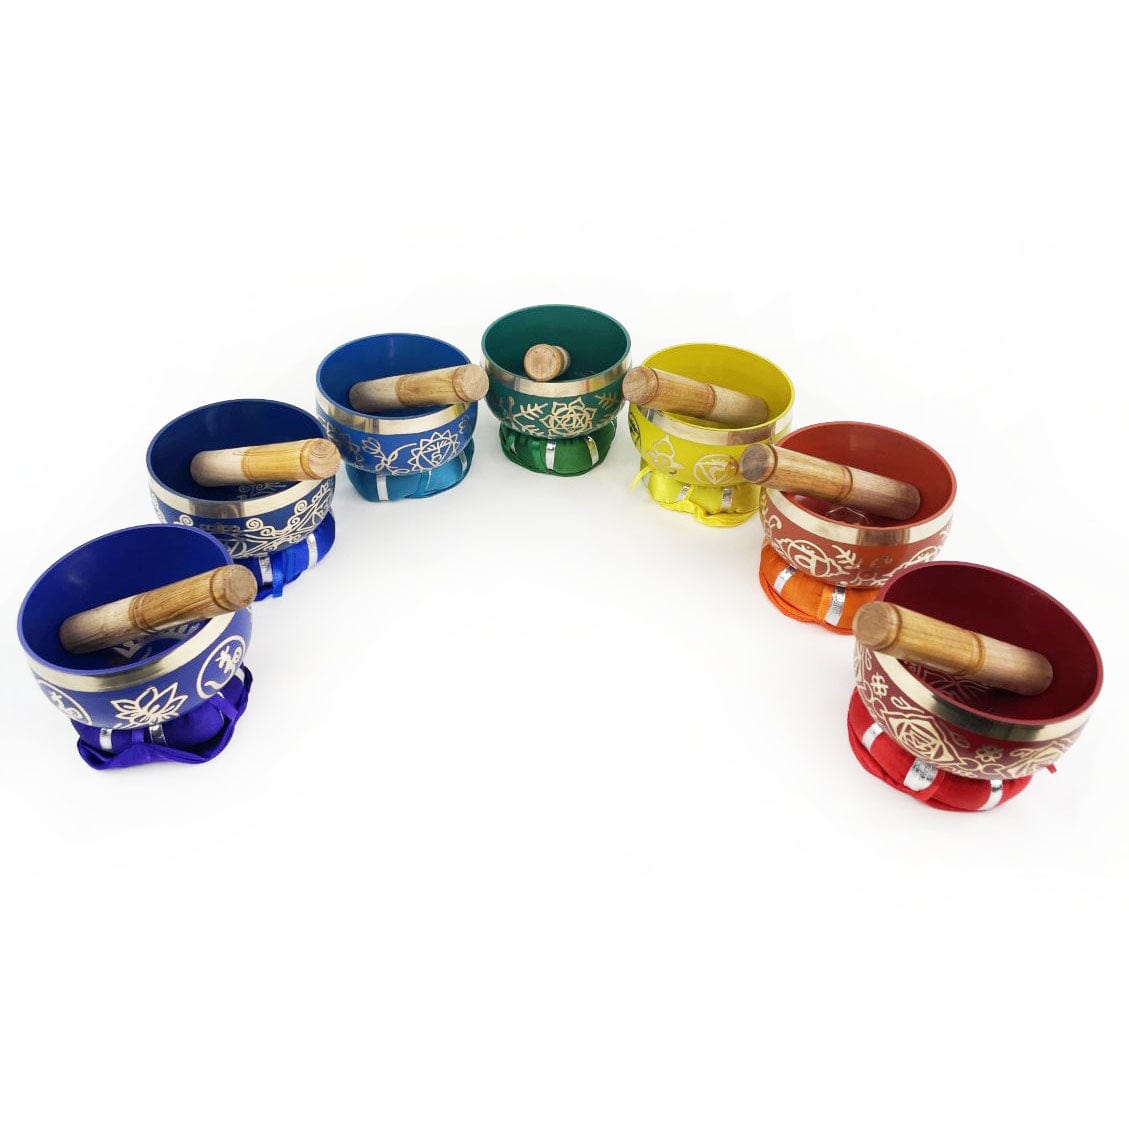 All 7 Chakra Singing bowls with mallets in a semi circle.